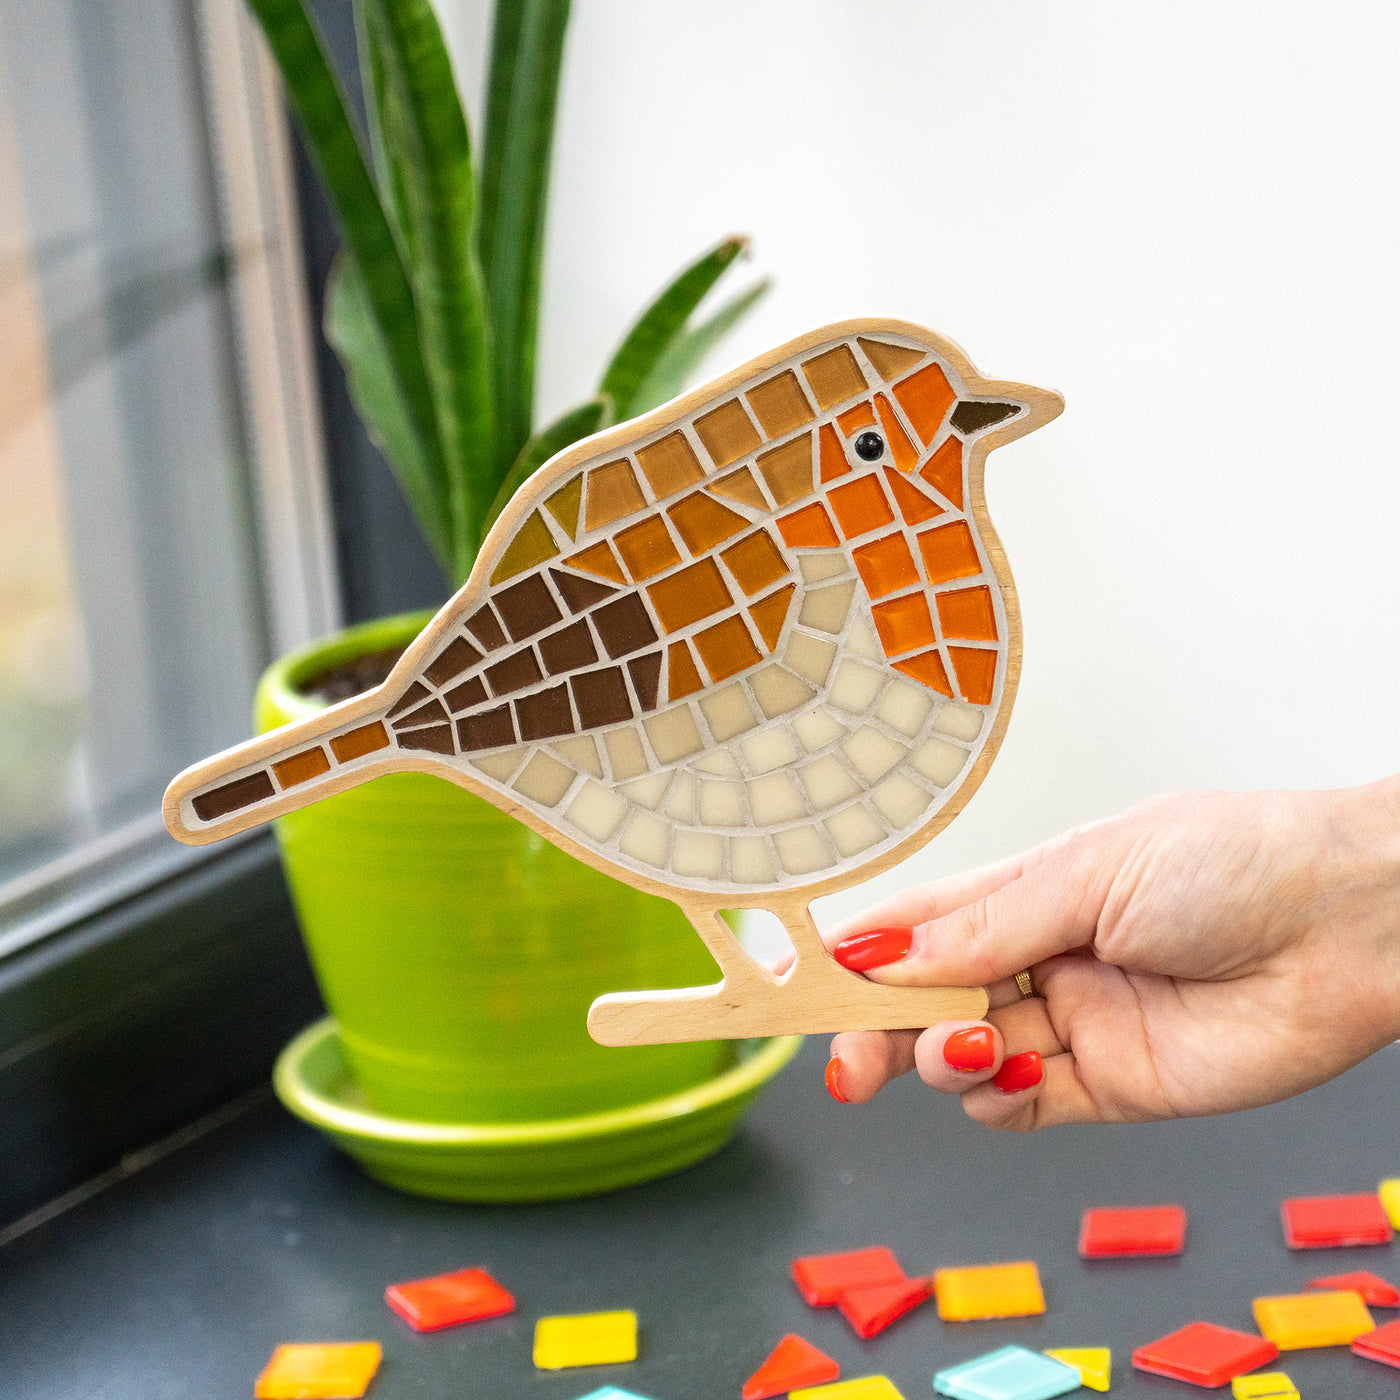 Robin-shaped glass mosaic for arts&crafts